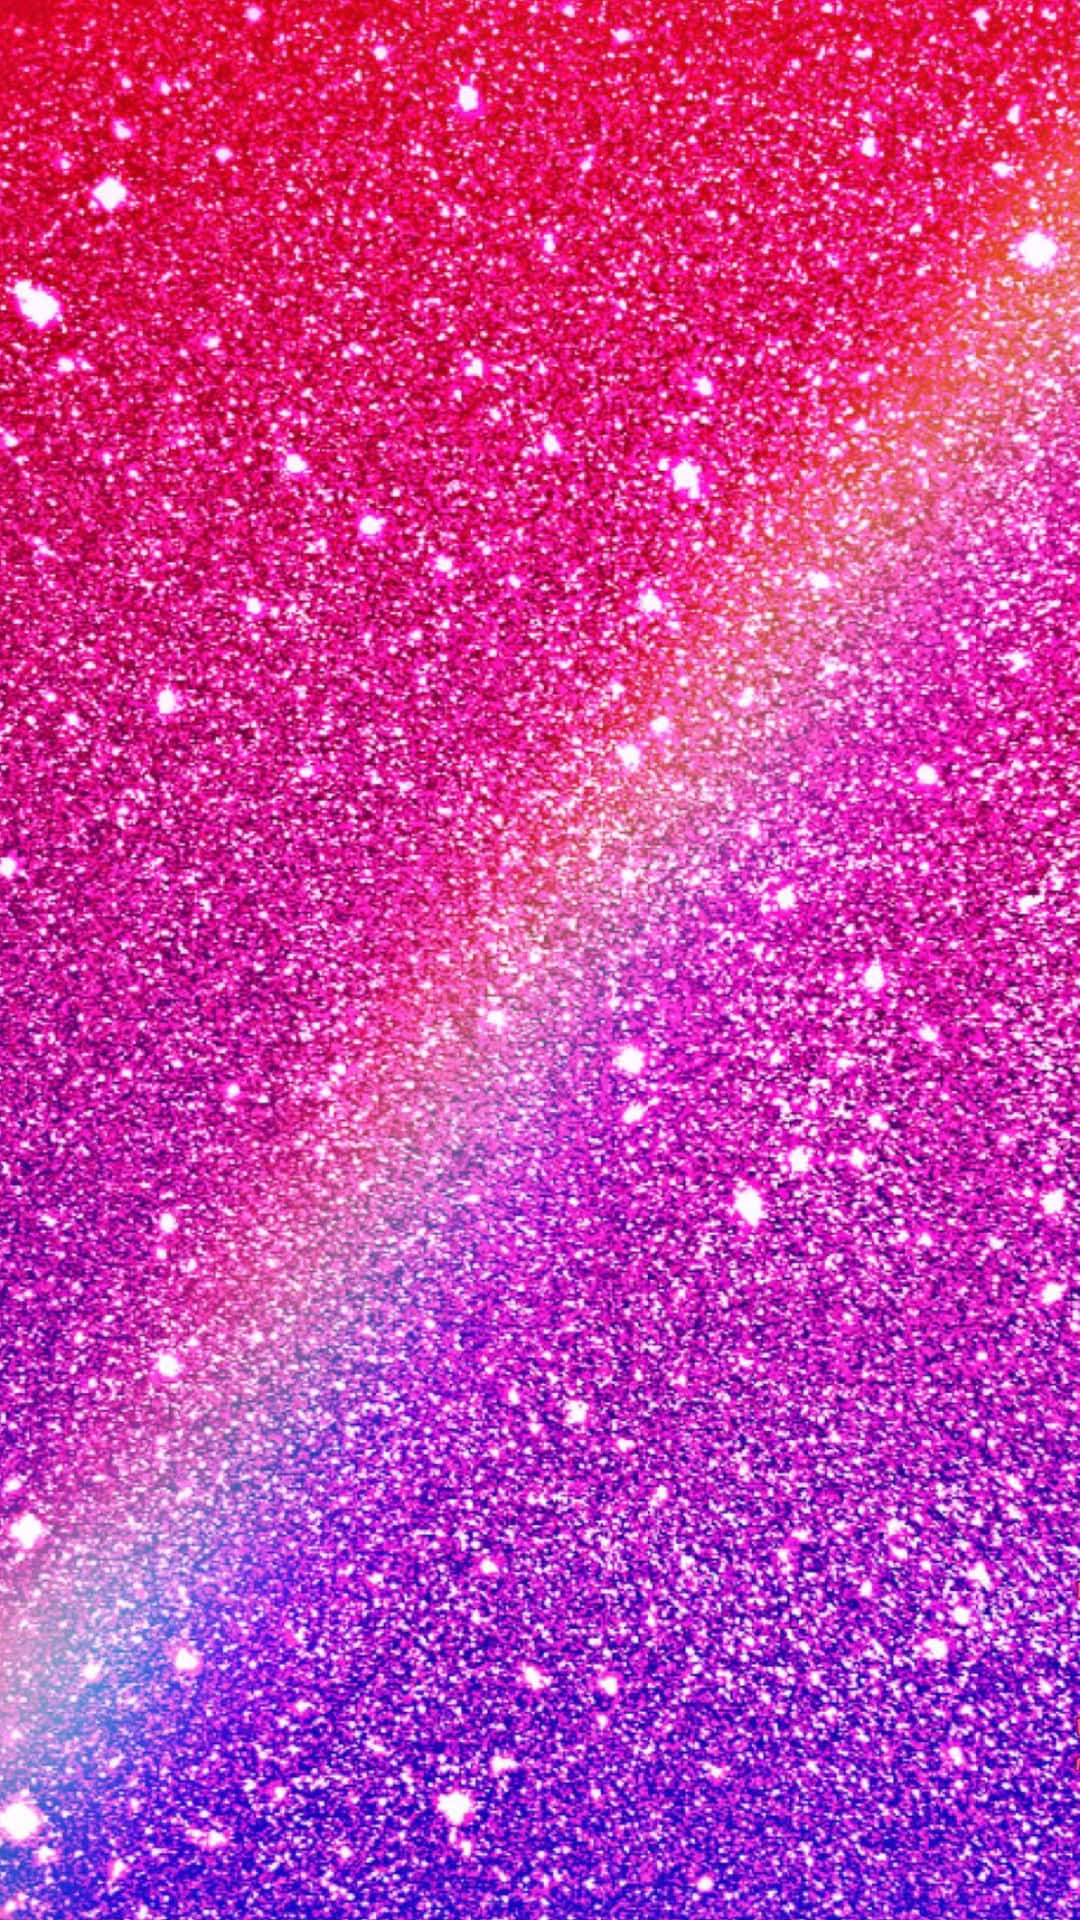 "A cheery rainbow of glittered colors." Wallpaper